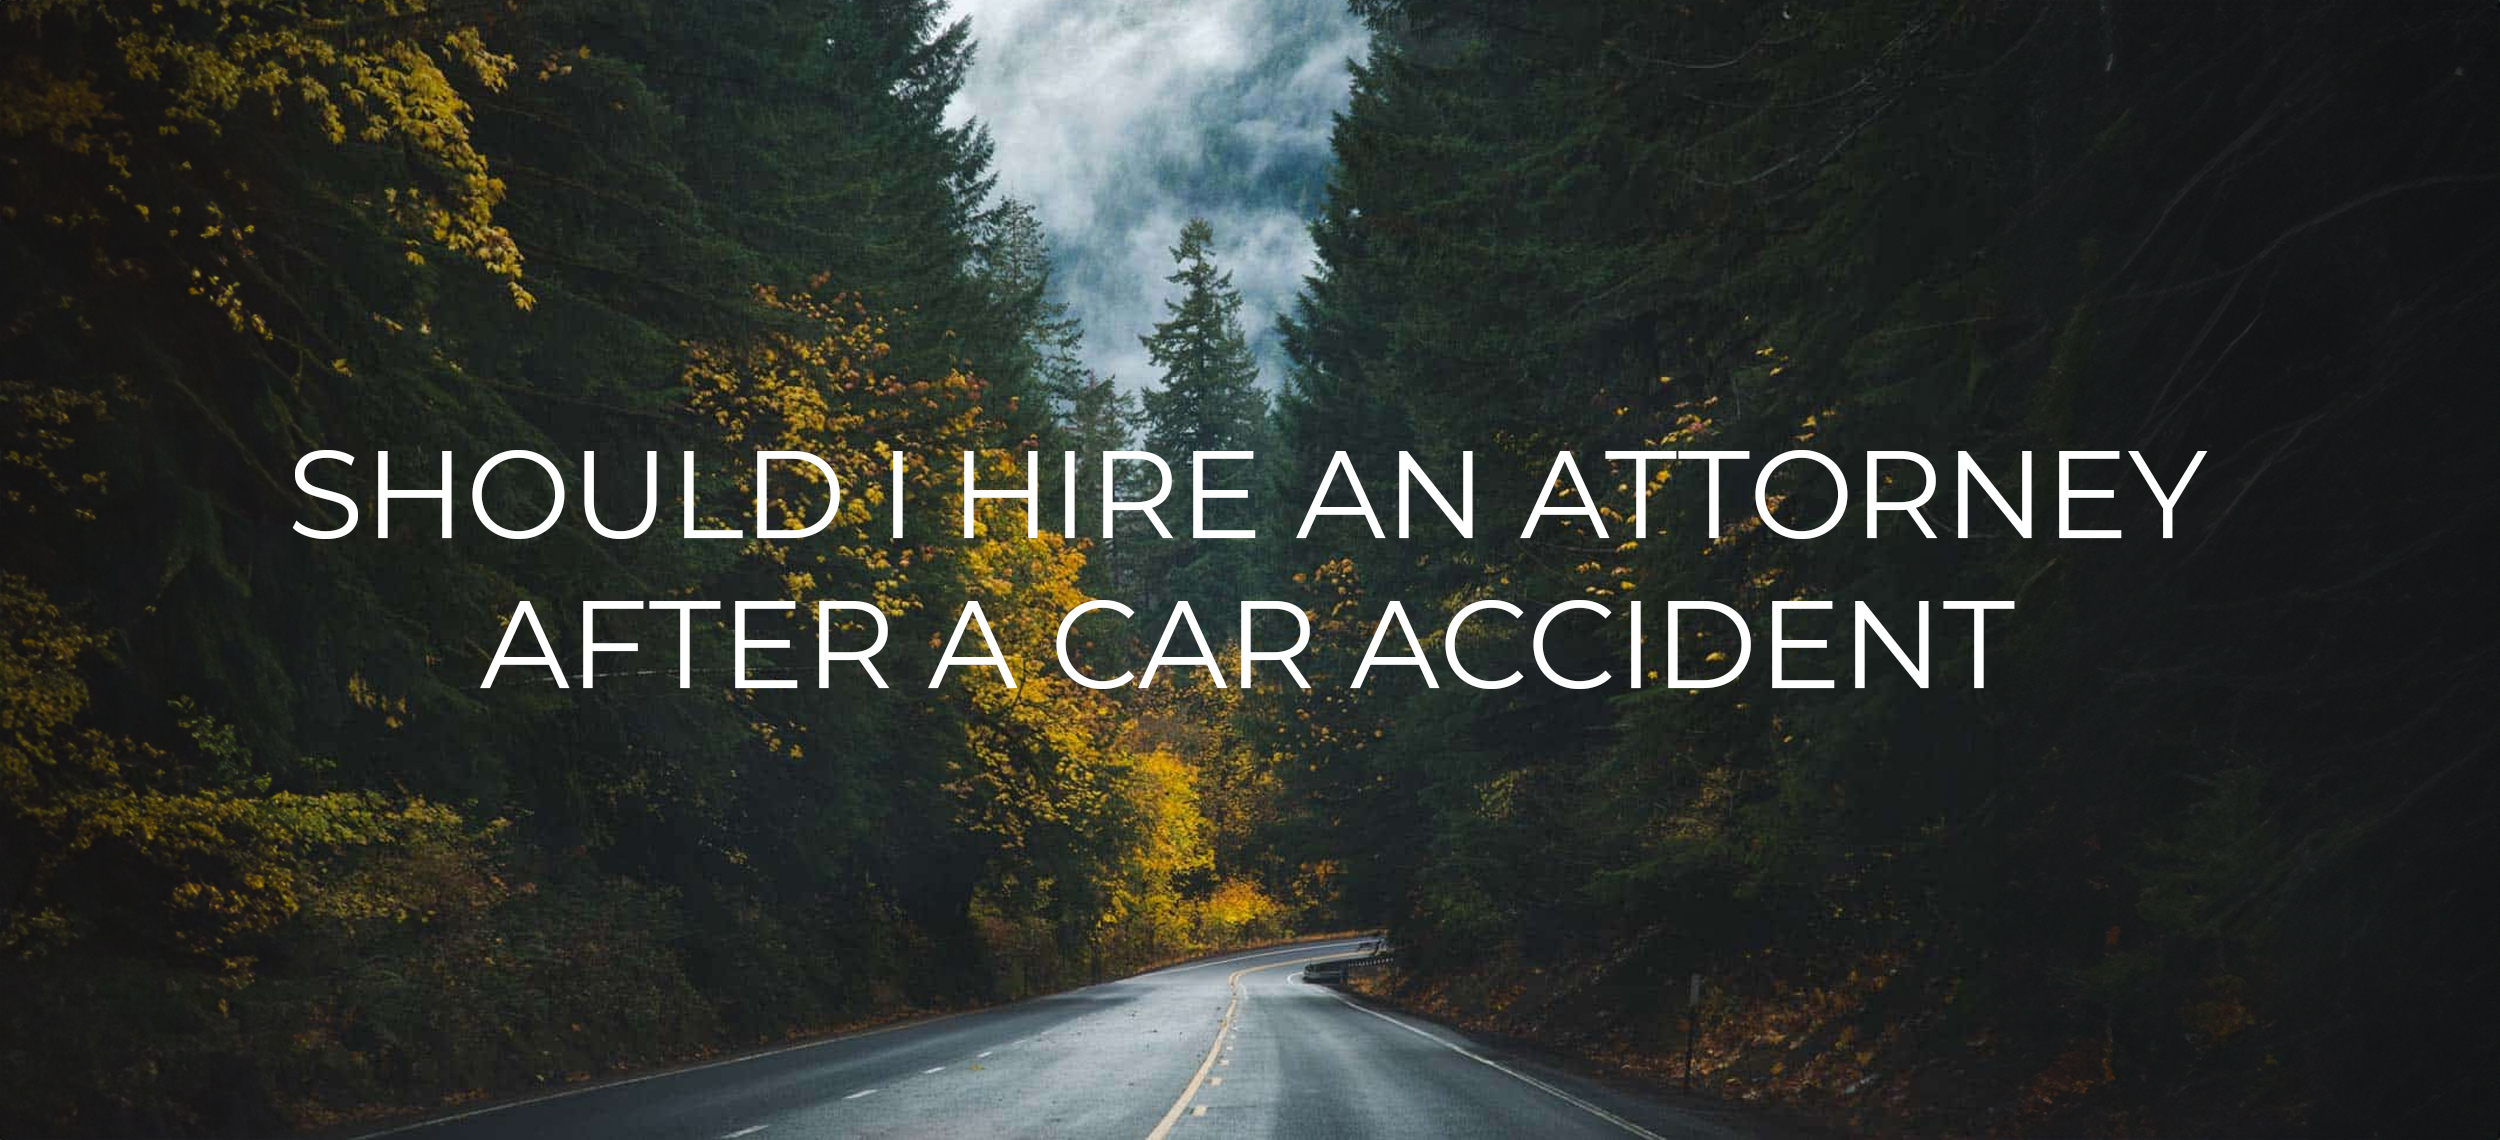 Should i hire an attorney after a car accident